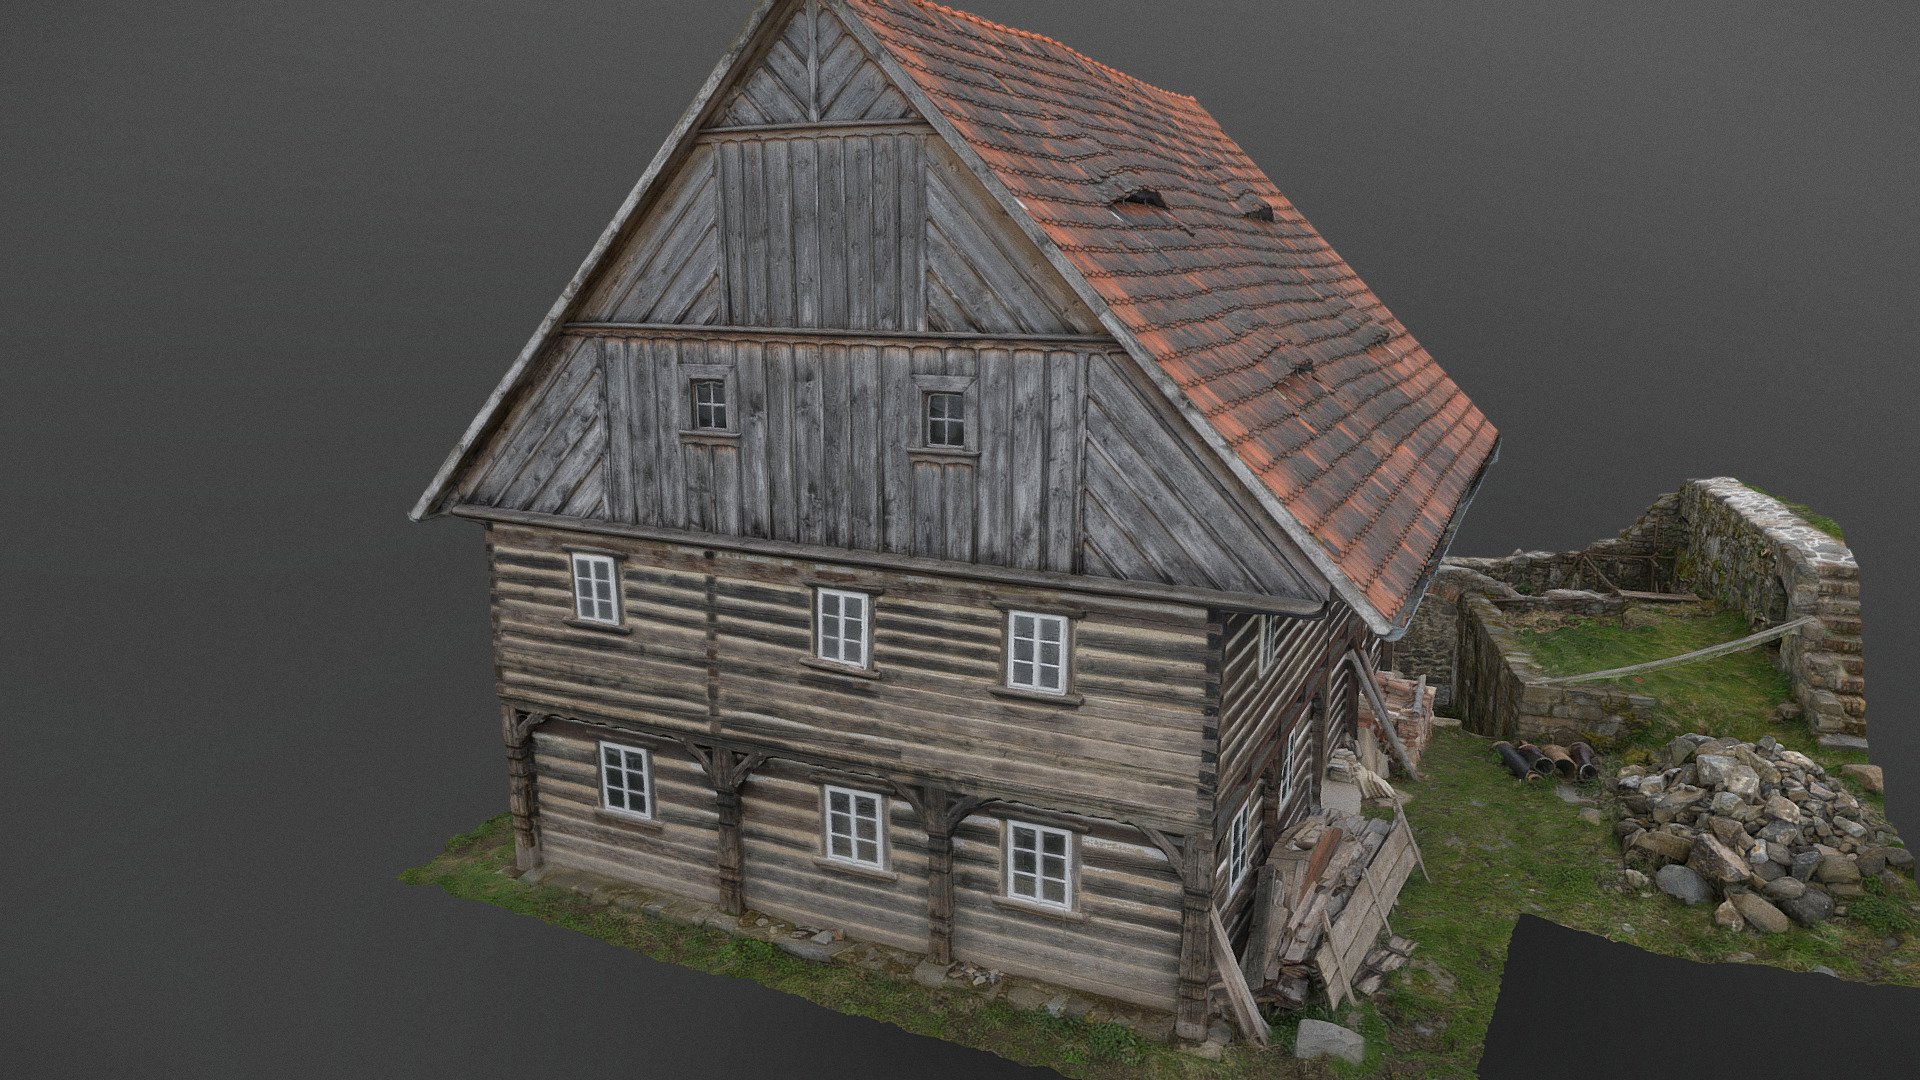 Medieval historic brown lumber half-timbered wooden cottage countryside family house water mill, 3 stories, balcony and red roof

photogrammetry scan (350x36MP), 5x8K texture +HD normals - contact me for source photos or re-exports - Medieval half-timbered mill - Buy Royalty Free 3D model by matousekfoto 3d model